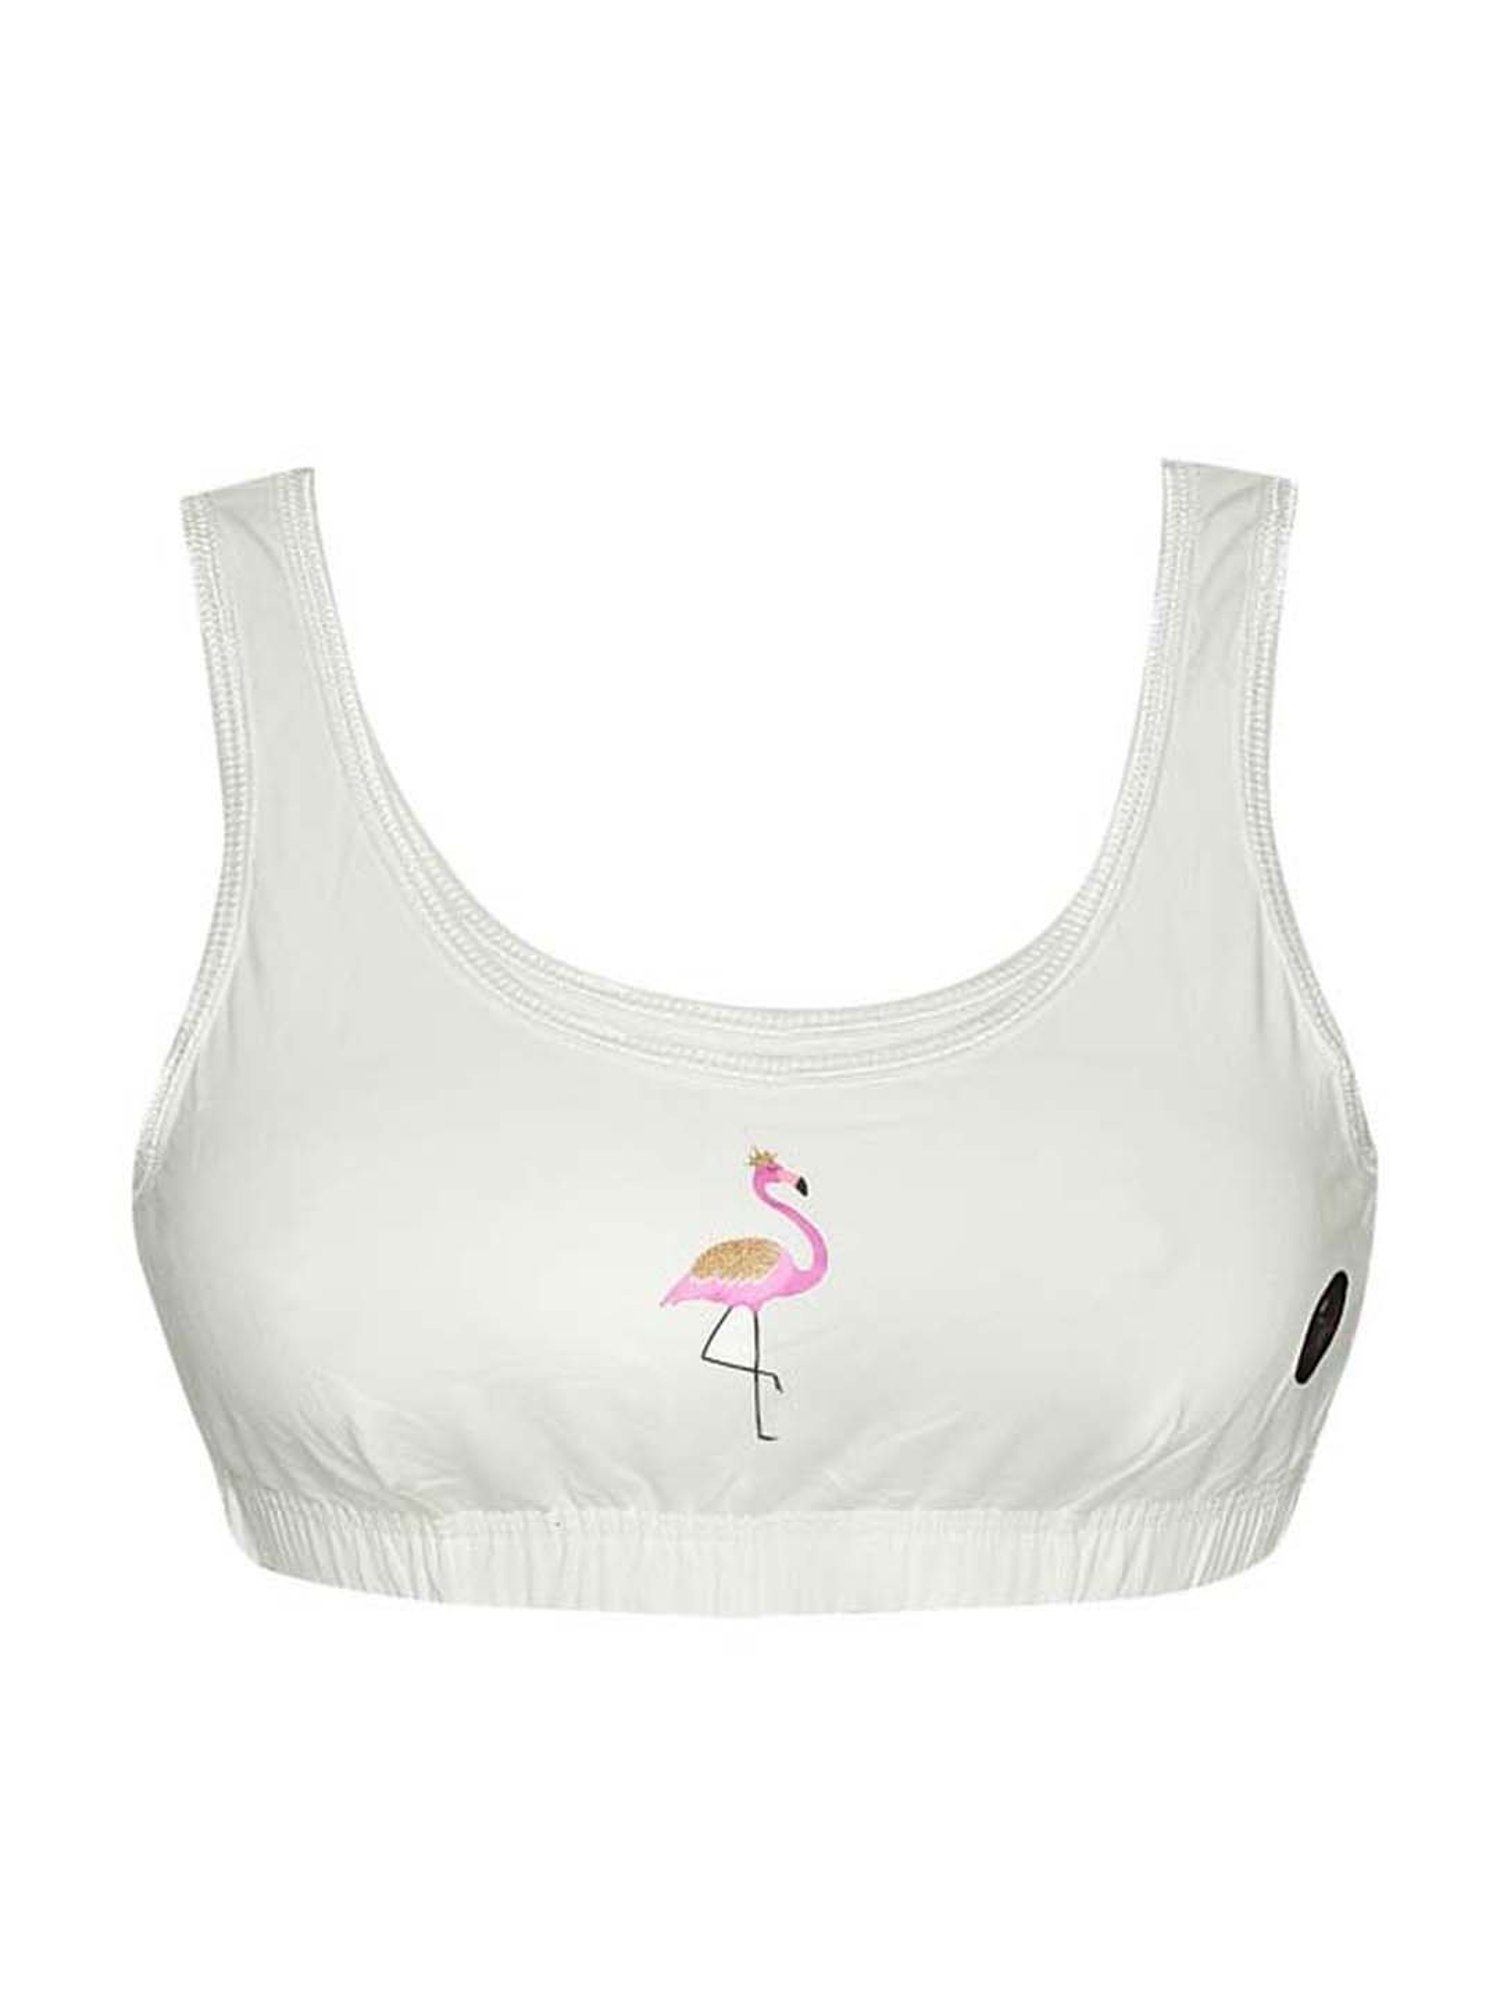 Buy Tiny Bugs Kids Multicolor Printed Sports Bras - Pack of 3 for Girls  Clothing Online @ Tata CLiQ